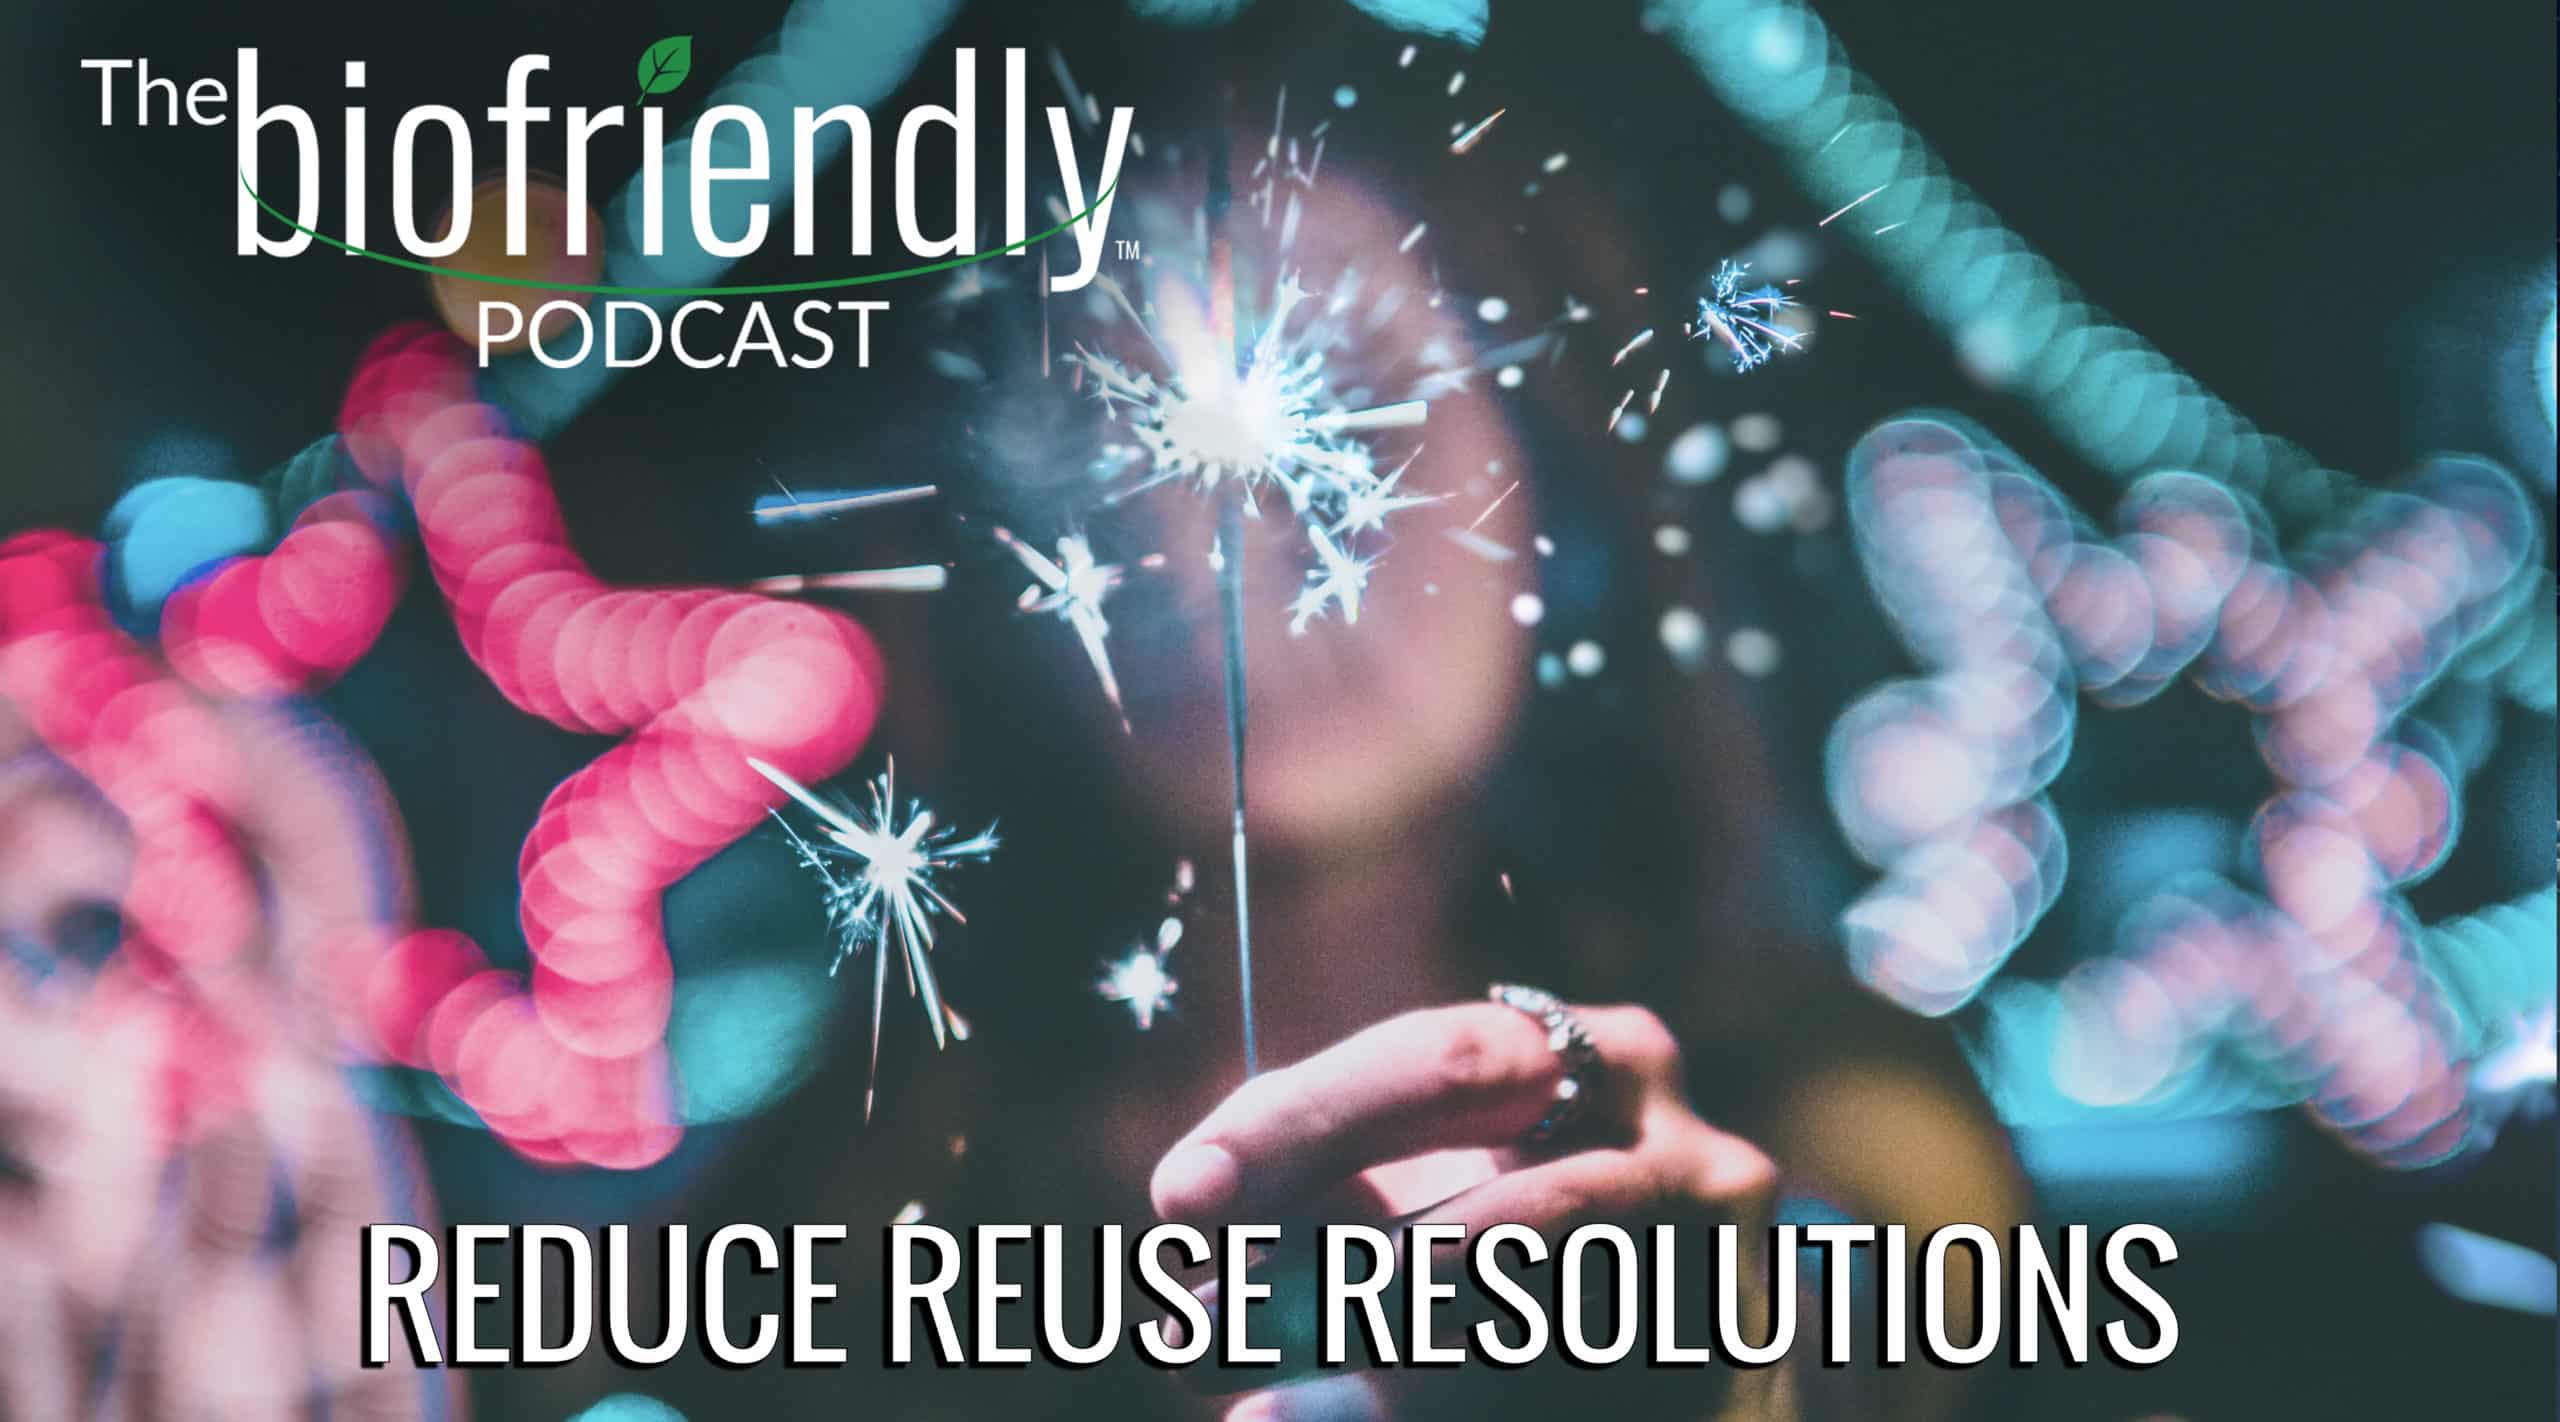 The Biofriendly Podcast - Episode 43 - Reduce Reuse Resolutions